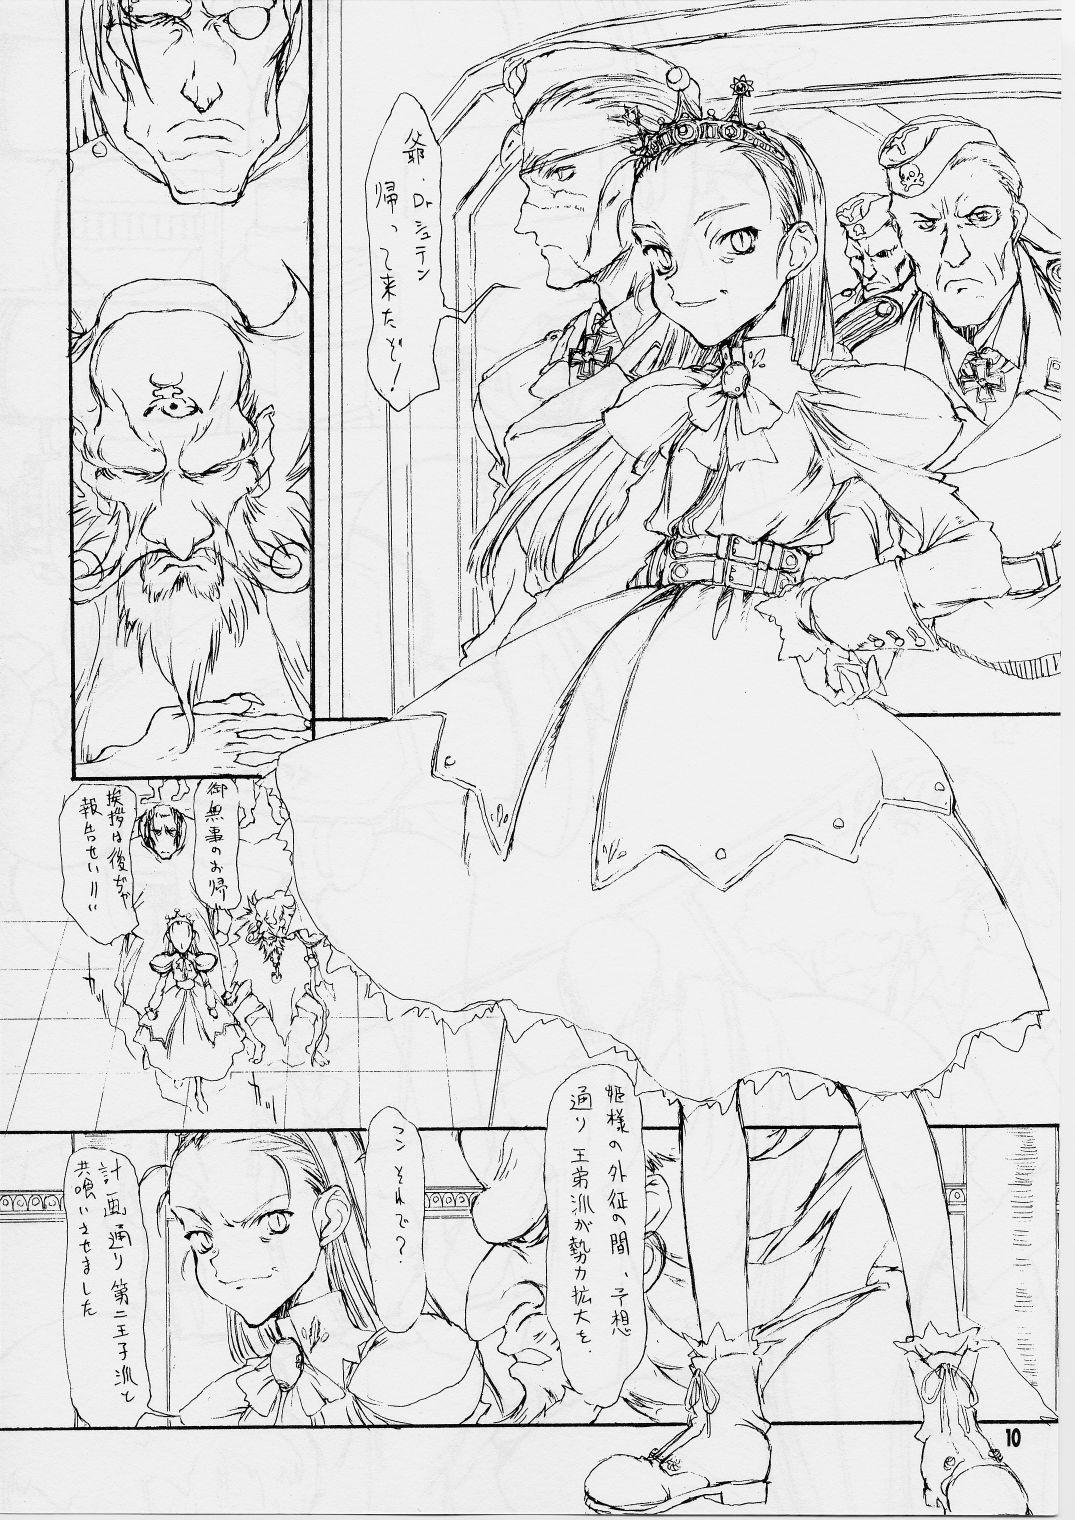 Anal Play The First Royal Princess Of Guards 5 - Cyberbots Candid - Page 9